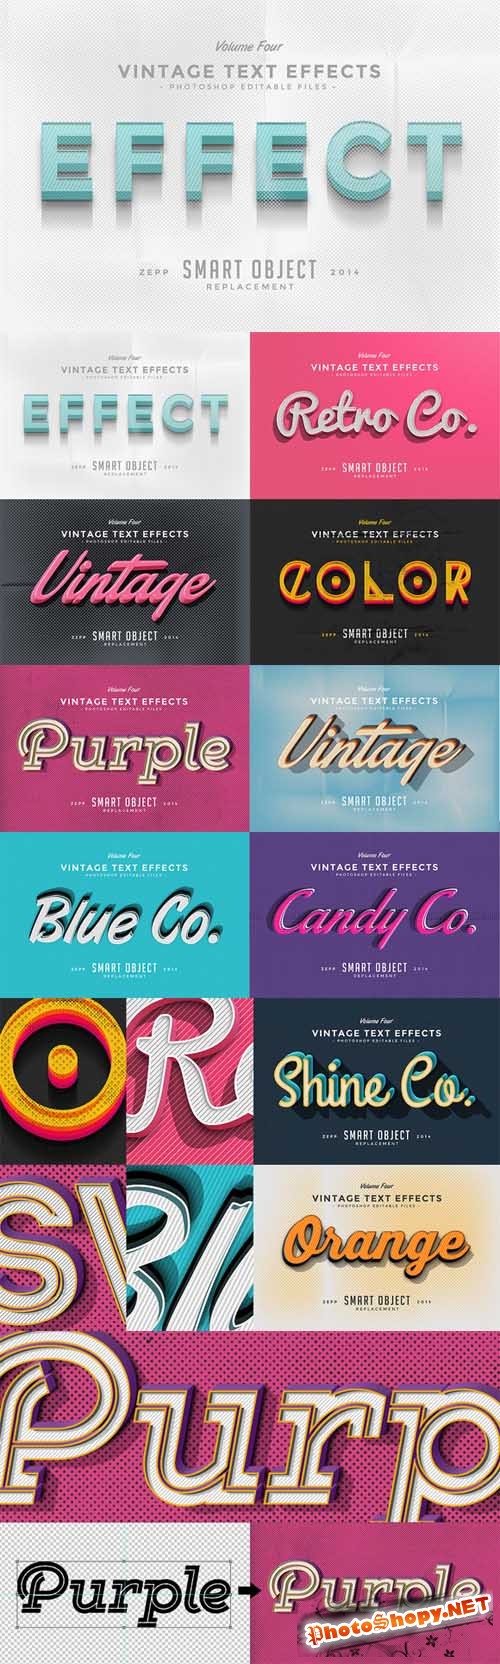 Vintage Text Effects Vol 4